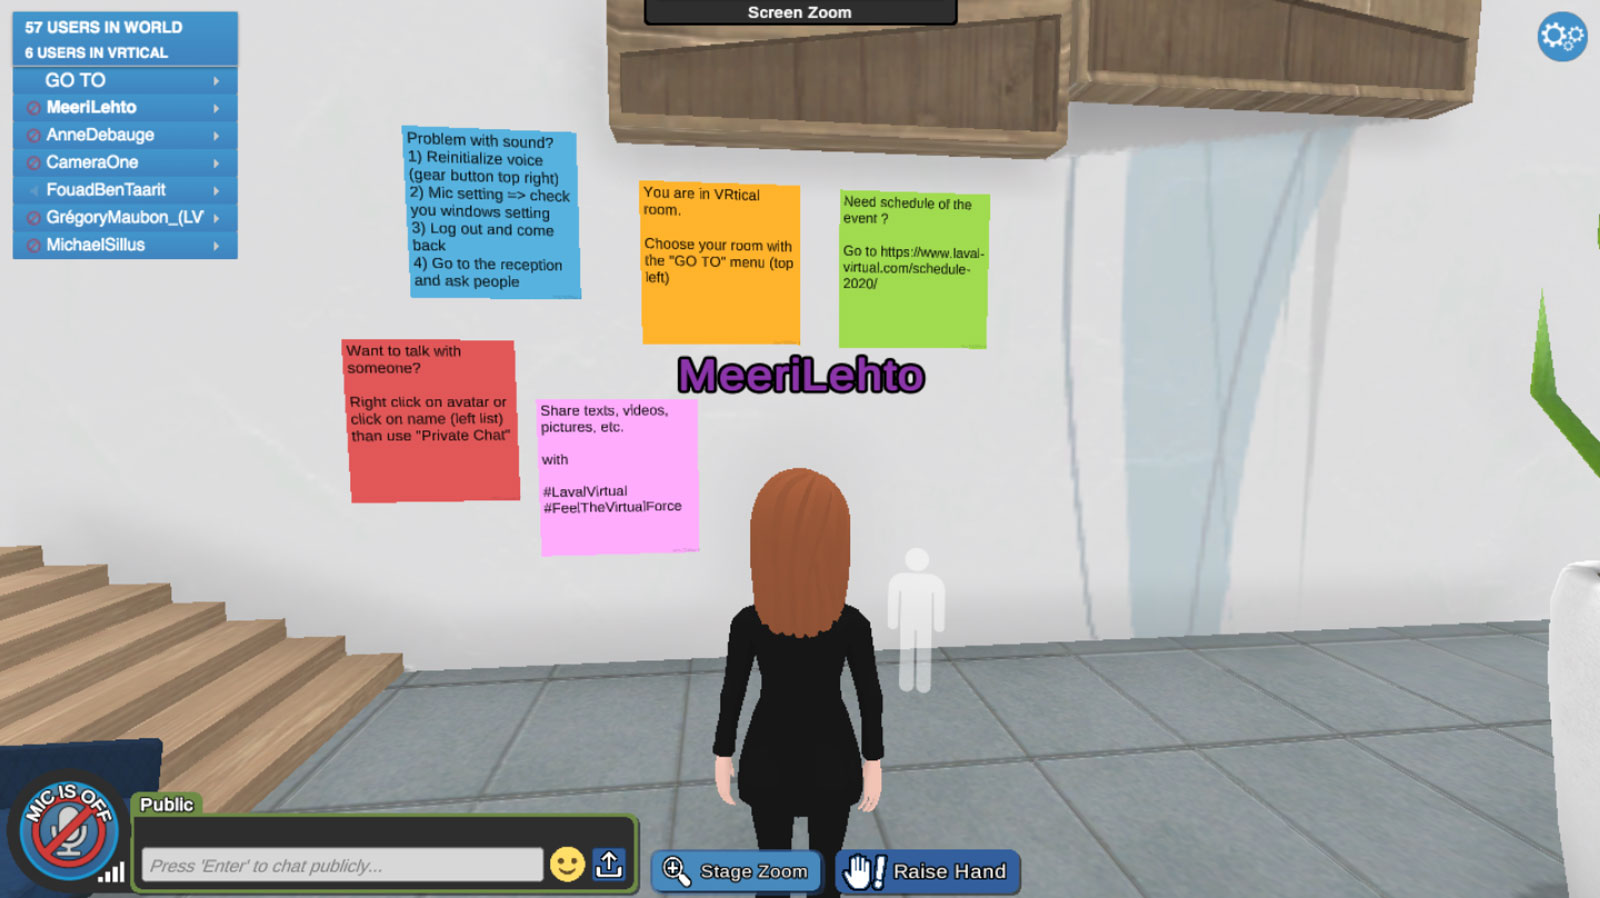 A screenshot of Laval Virtual World 2020, where the user’s avatar is checking out post-it notes on the wall. The notes are about how to use the virtual platform.